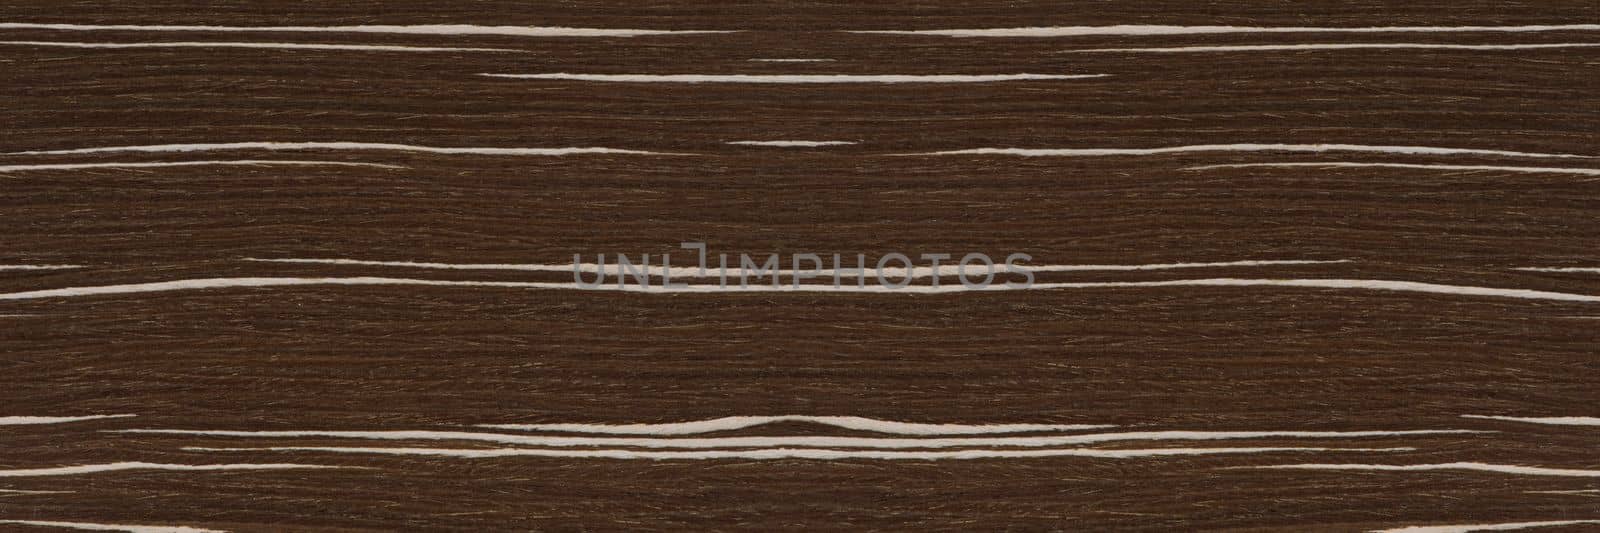 Texture of wood with stripes. Texture of natural African wood with zebra pattern. High resolution photo of a brown black board